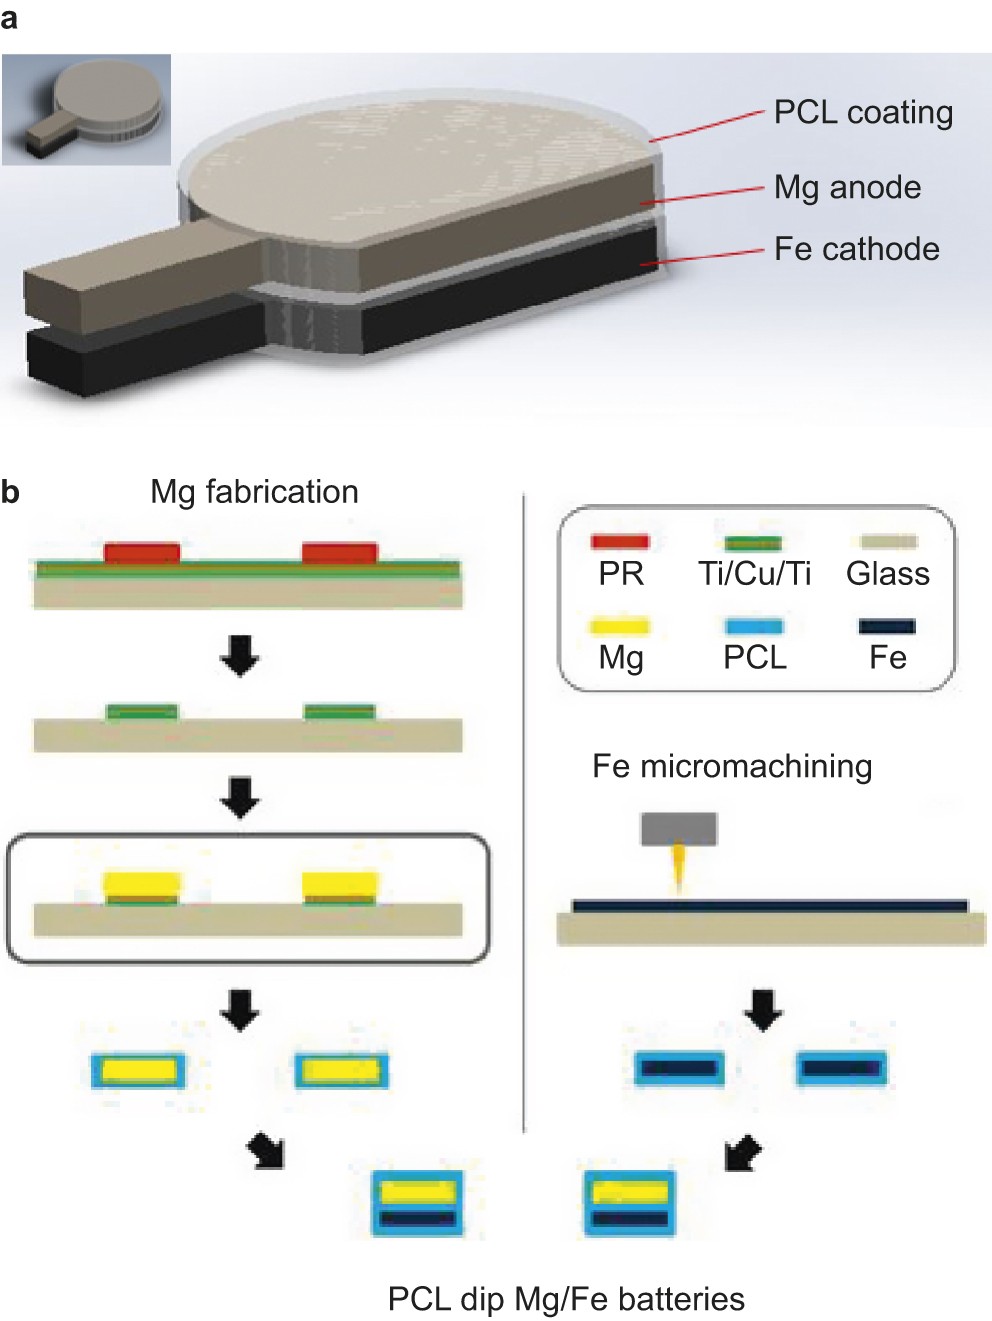 Biodegradable magnesium/iron batteries with polycaprolactone encapsulation:  A microfabricated power source for transient implantable devices |  Microsystems & Nanoengineering